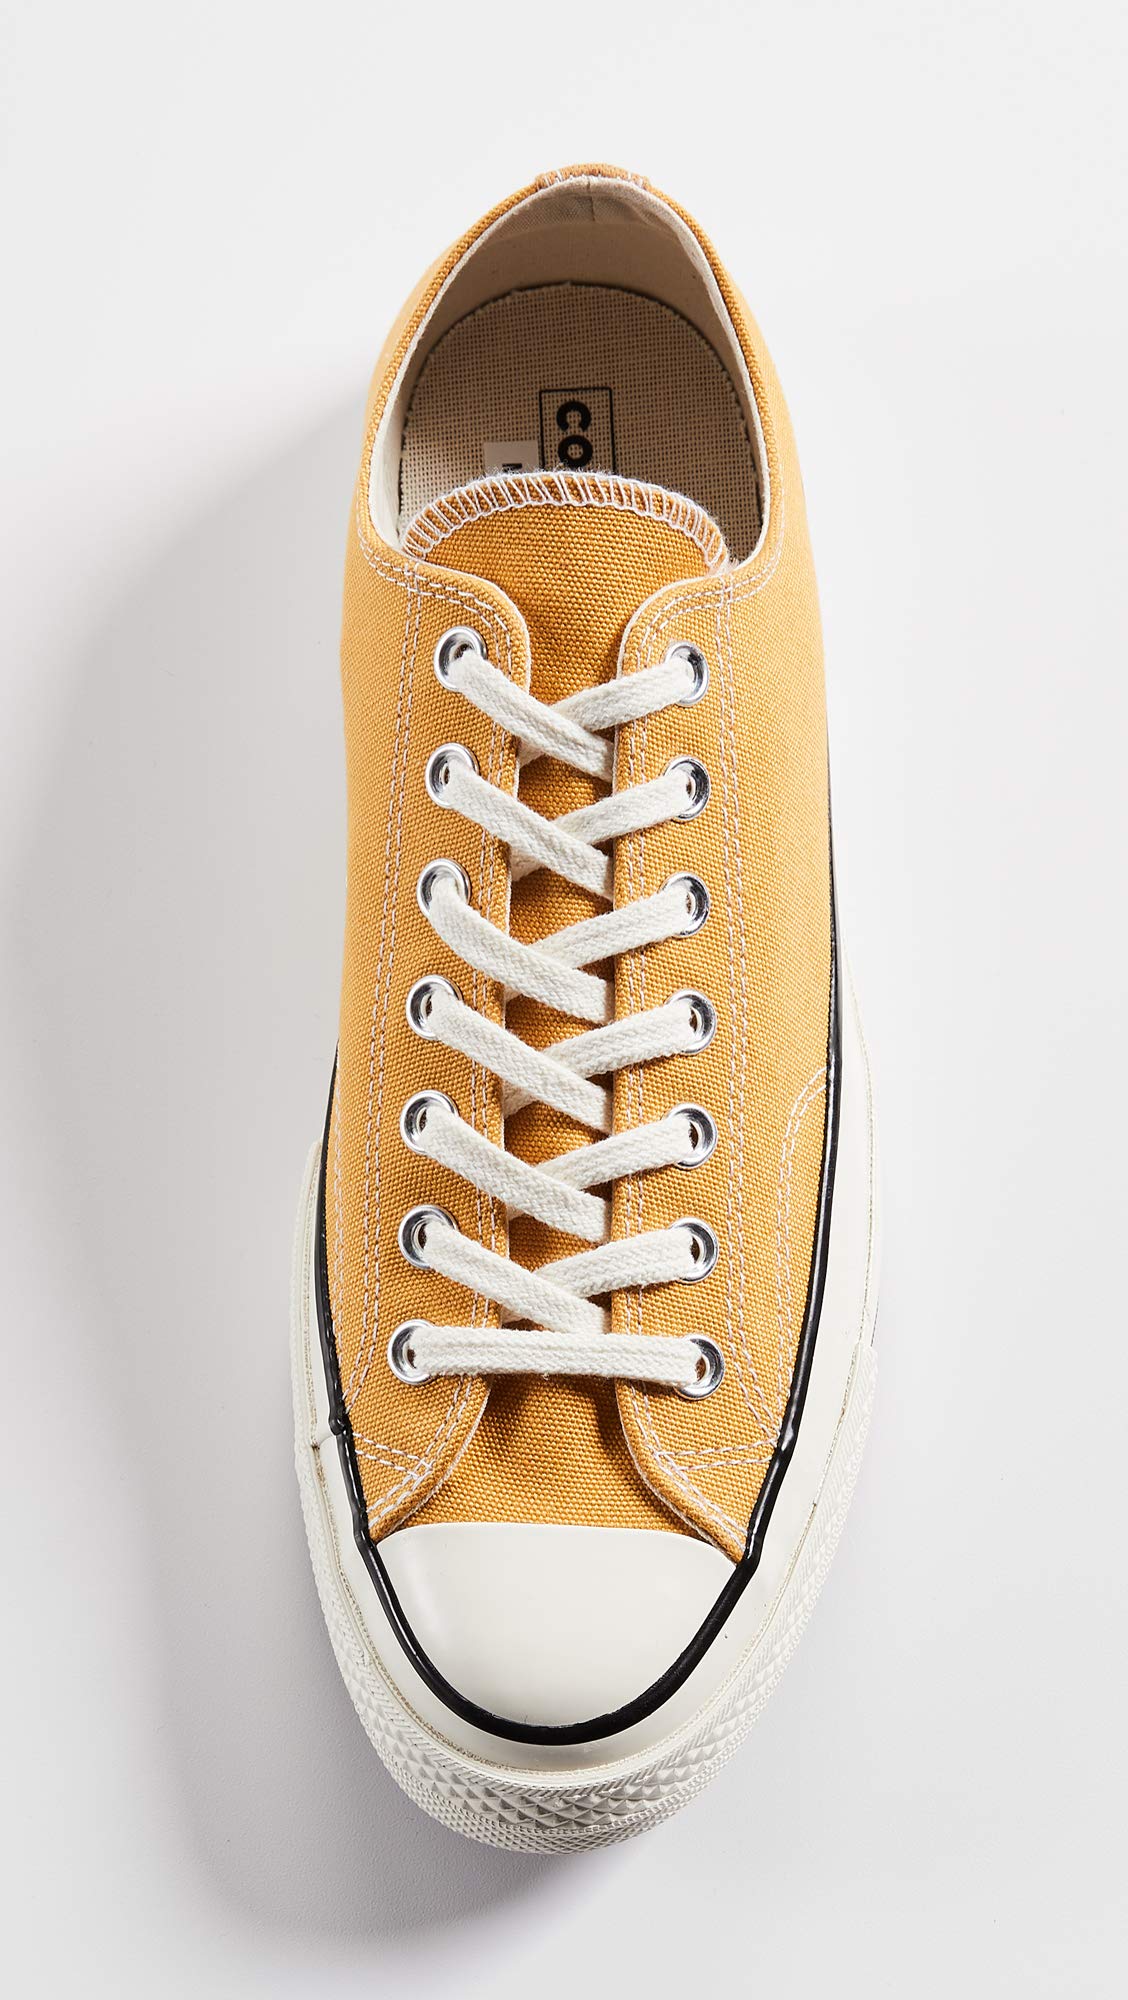 Converse Men's Chuck Taylor All Star ‘70s Sneakers